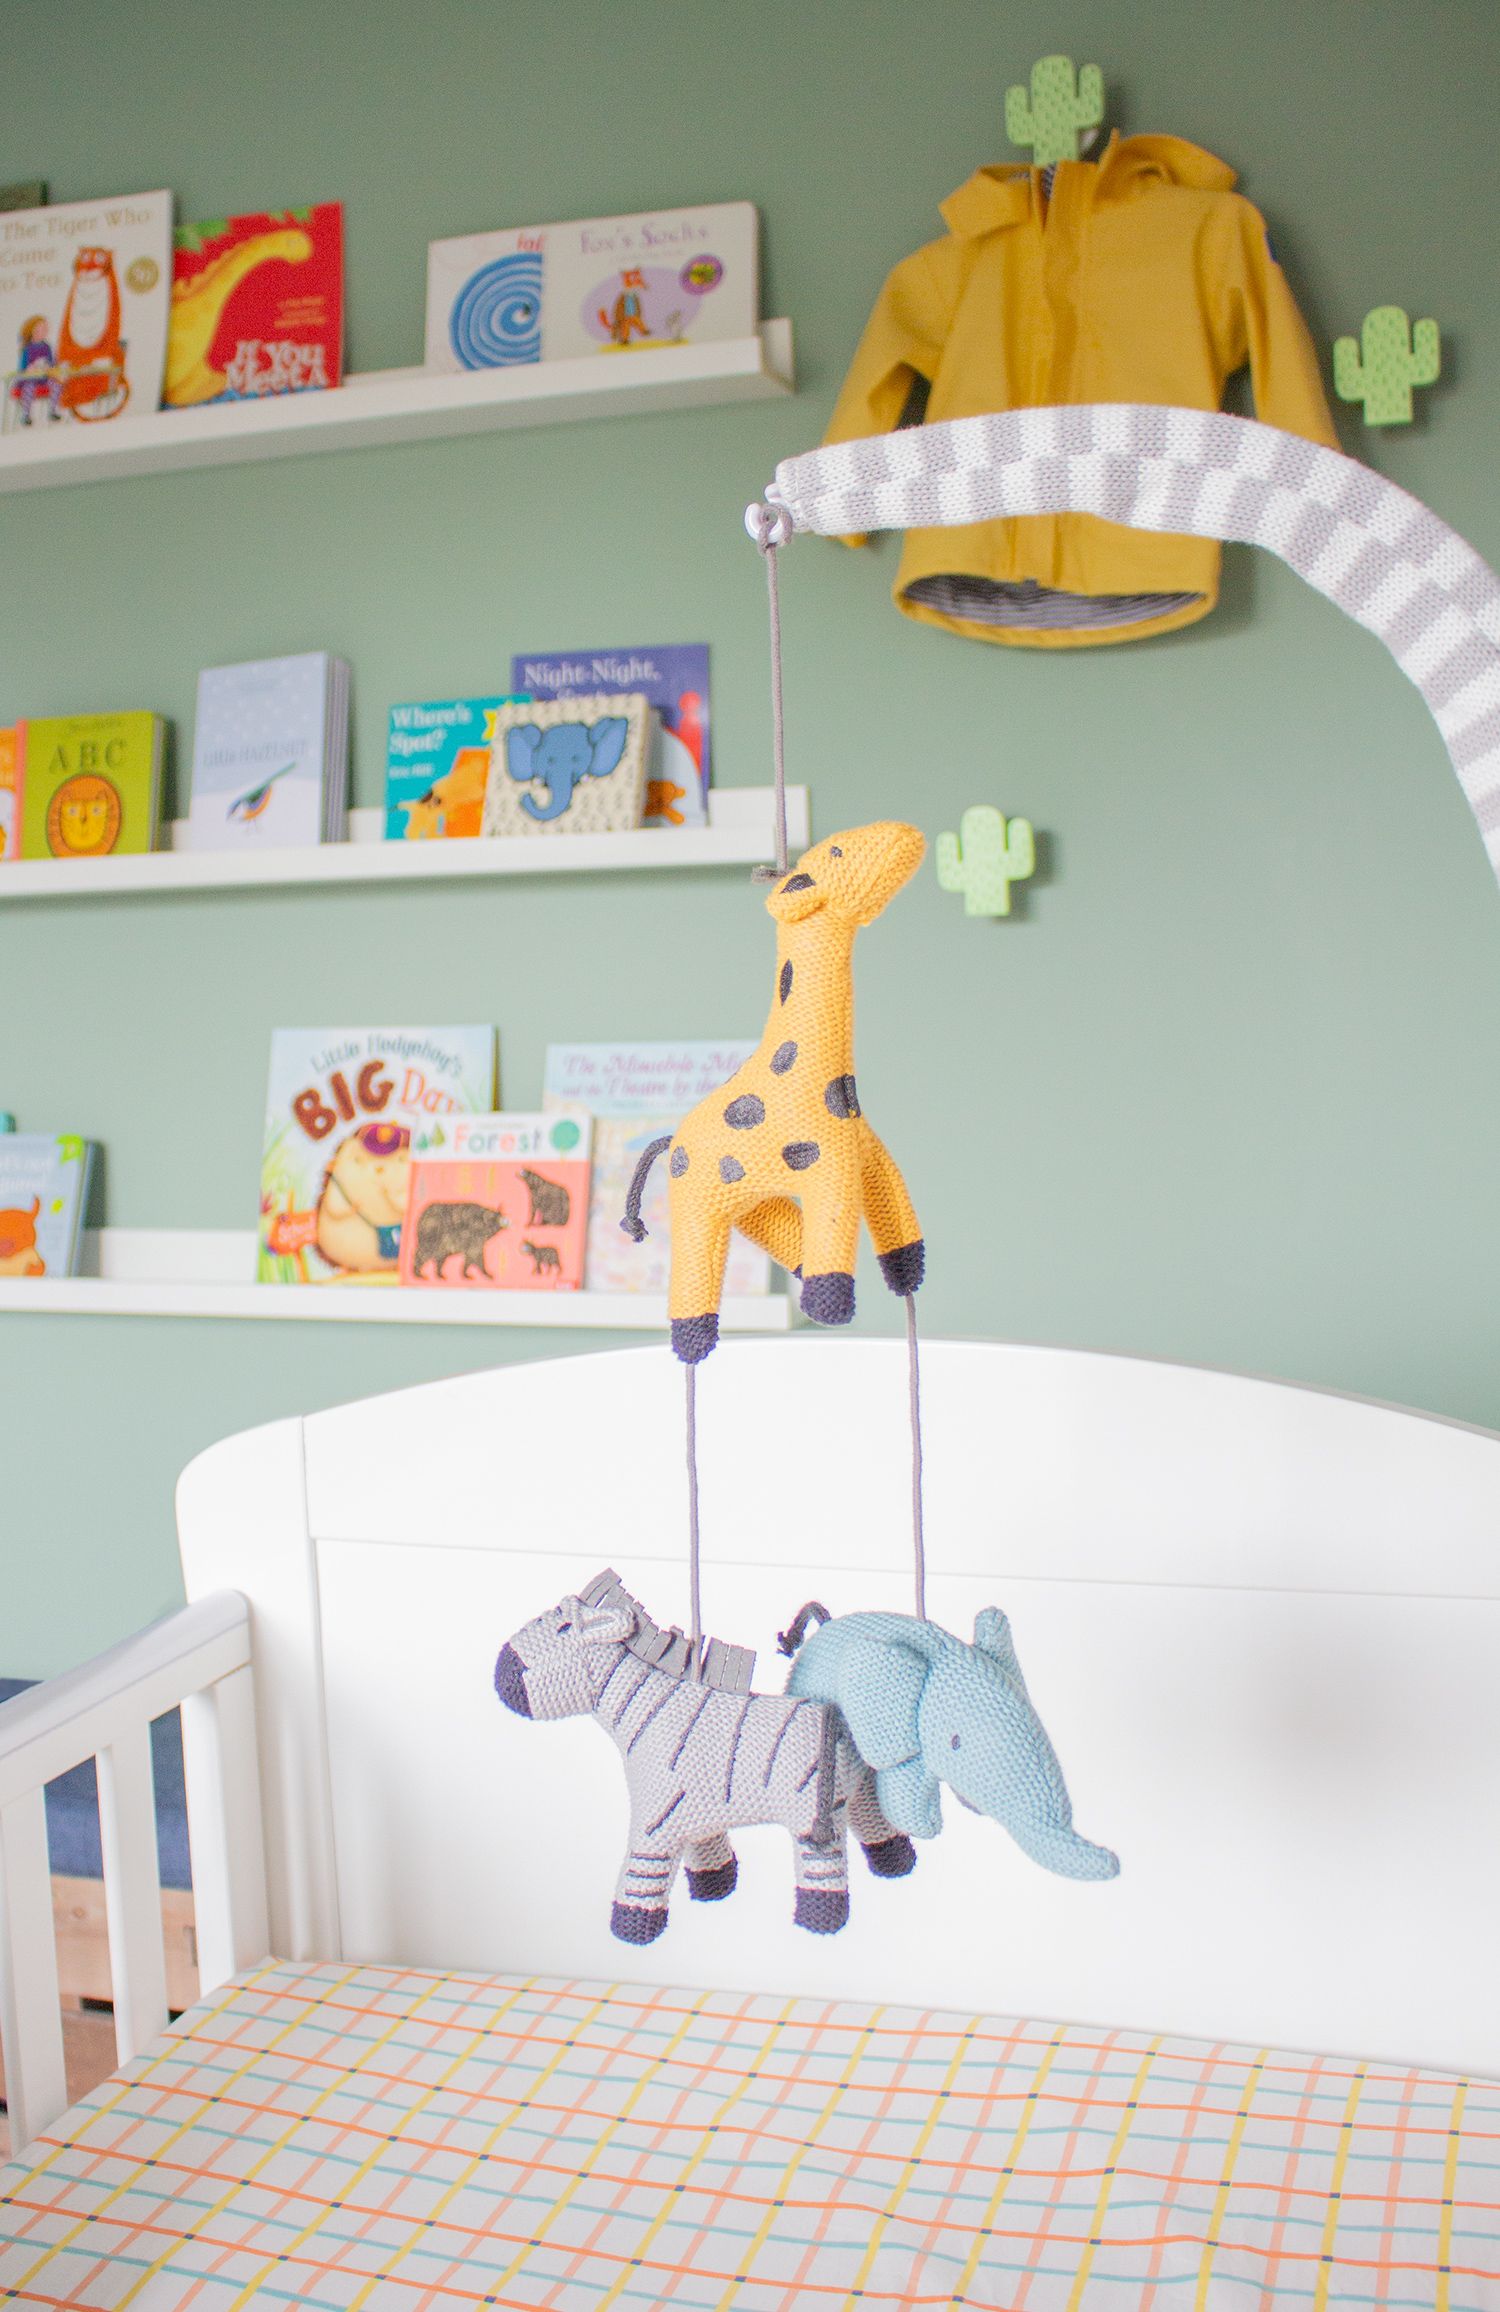 A close up of the soft toy cot mobile which has a giraffe, an elephant and a zebra.